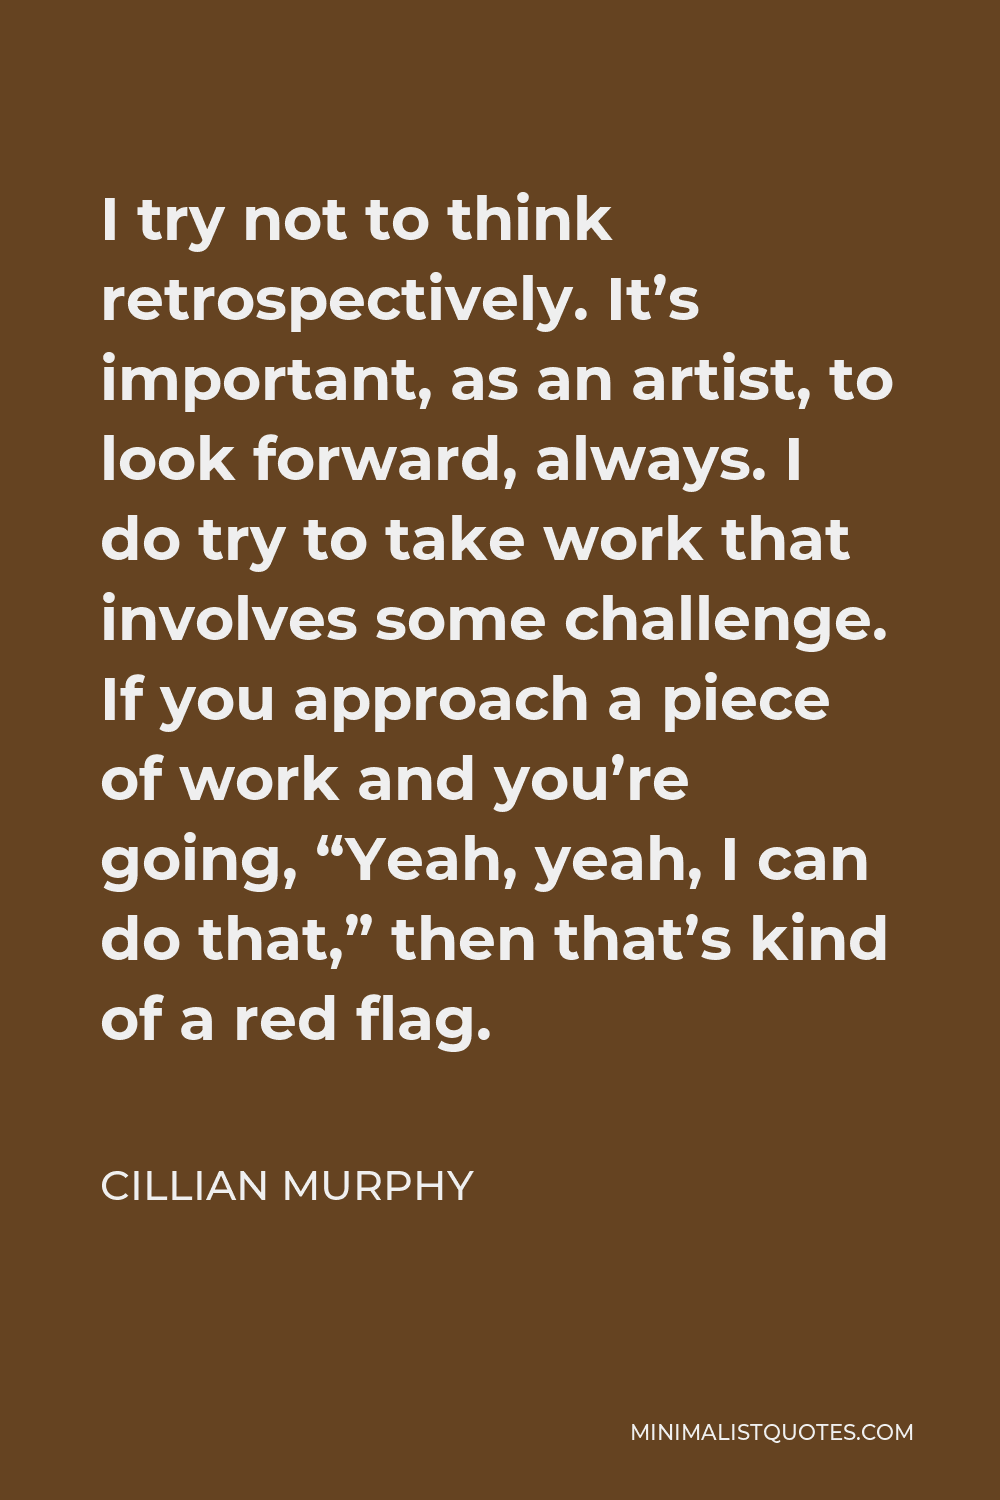 Cillian Murphy Quote - I try not to think retrospectively. It’s important, as an artist, to look forward, always. I do try to take work that involves some challenge. If you approach a piece of work and you’re going, “Yeah, yeah, I can do that,” then that’s kind of a red flag.